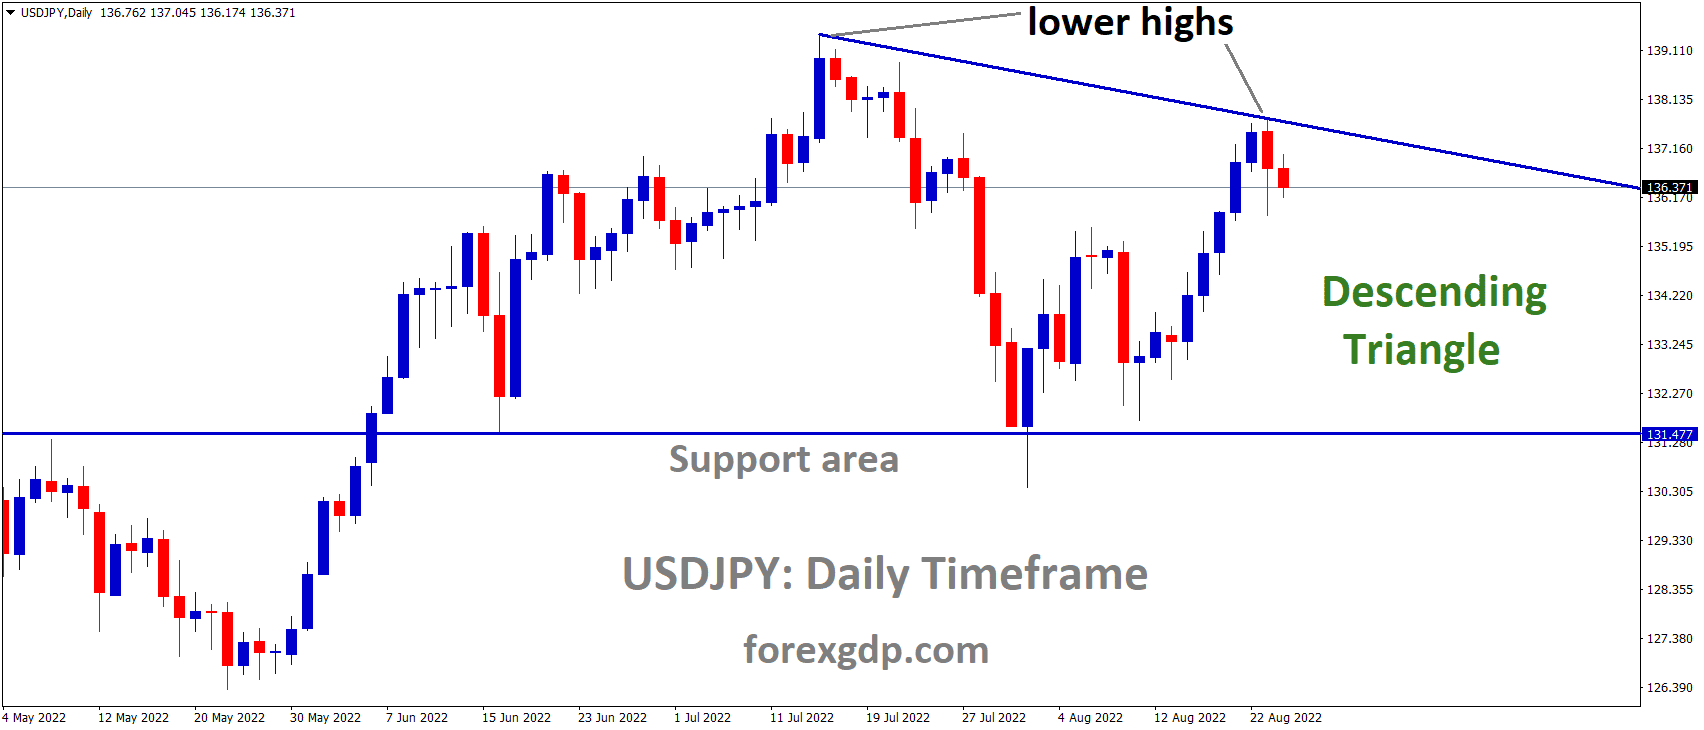 USDJPY is moving in the Descending triangle pattern and the market has fallen from the lower high area of the pattern